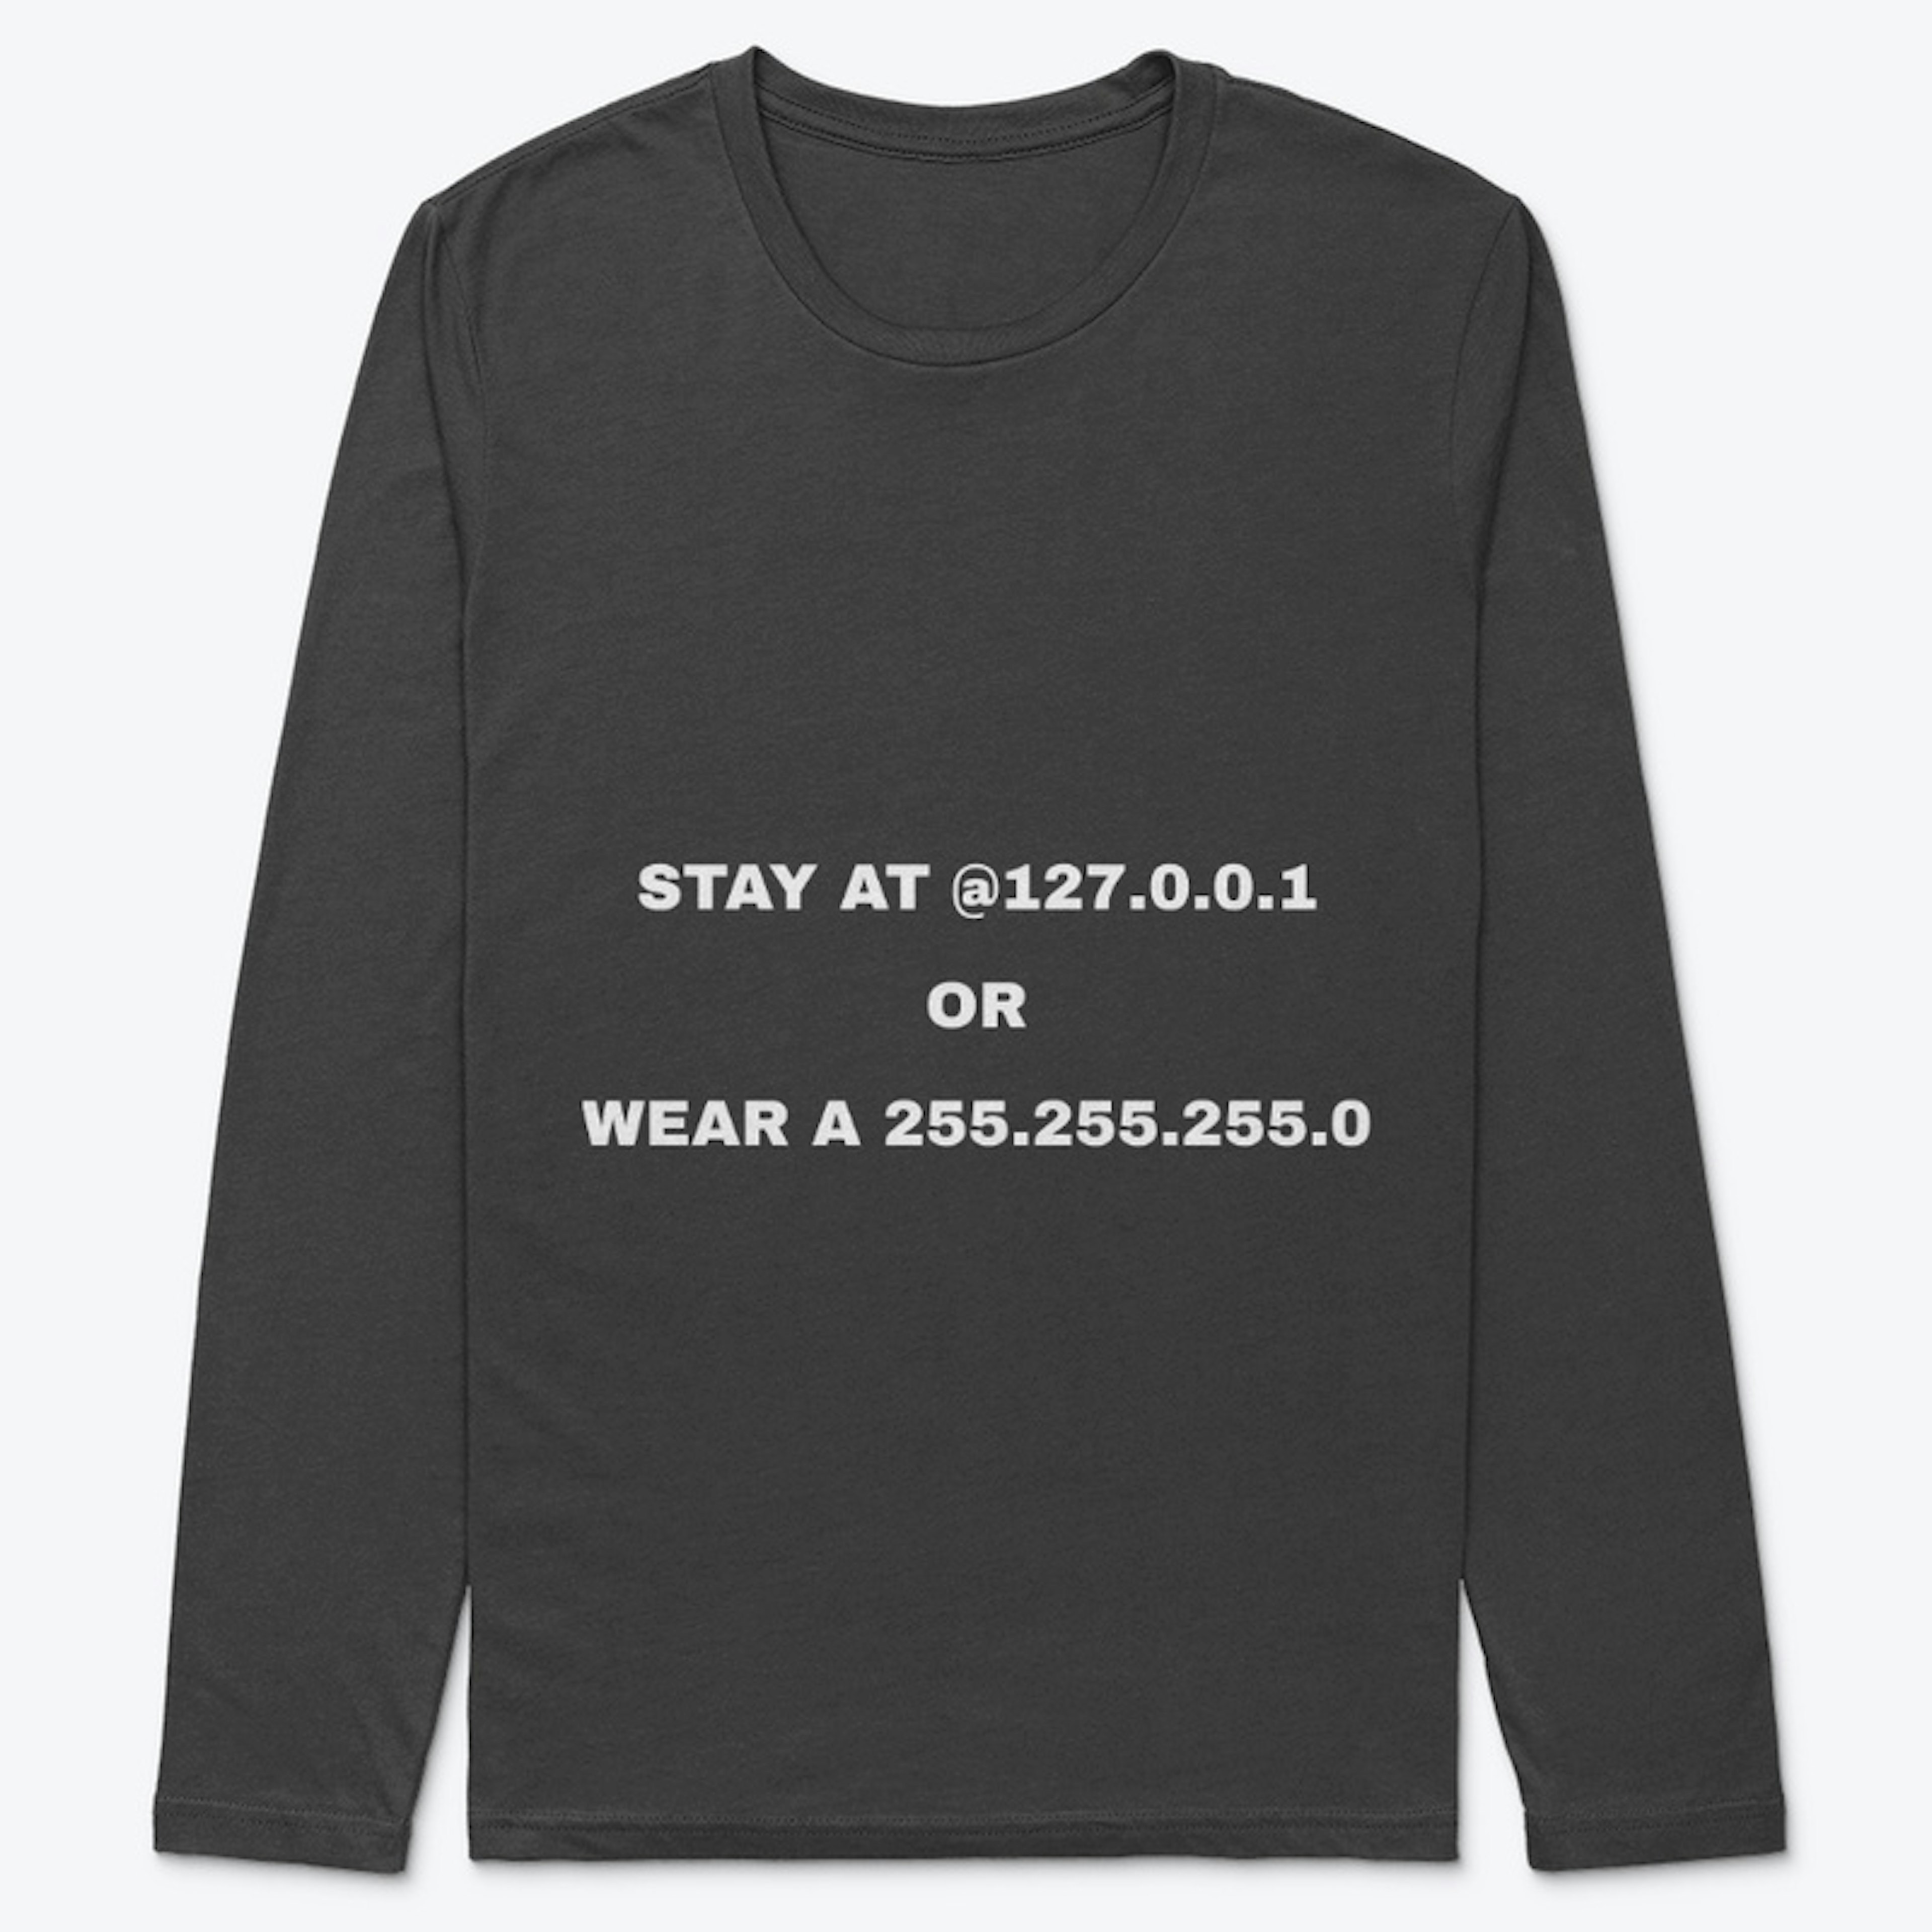 Stay at @127.0.0.1/Wear a 255.255.255.0